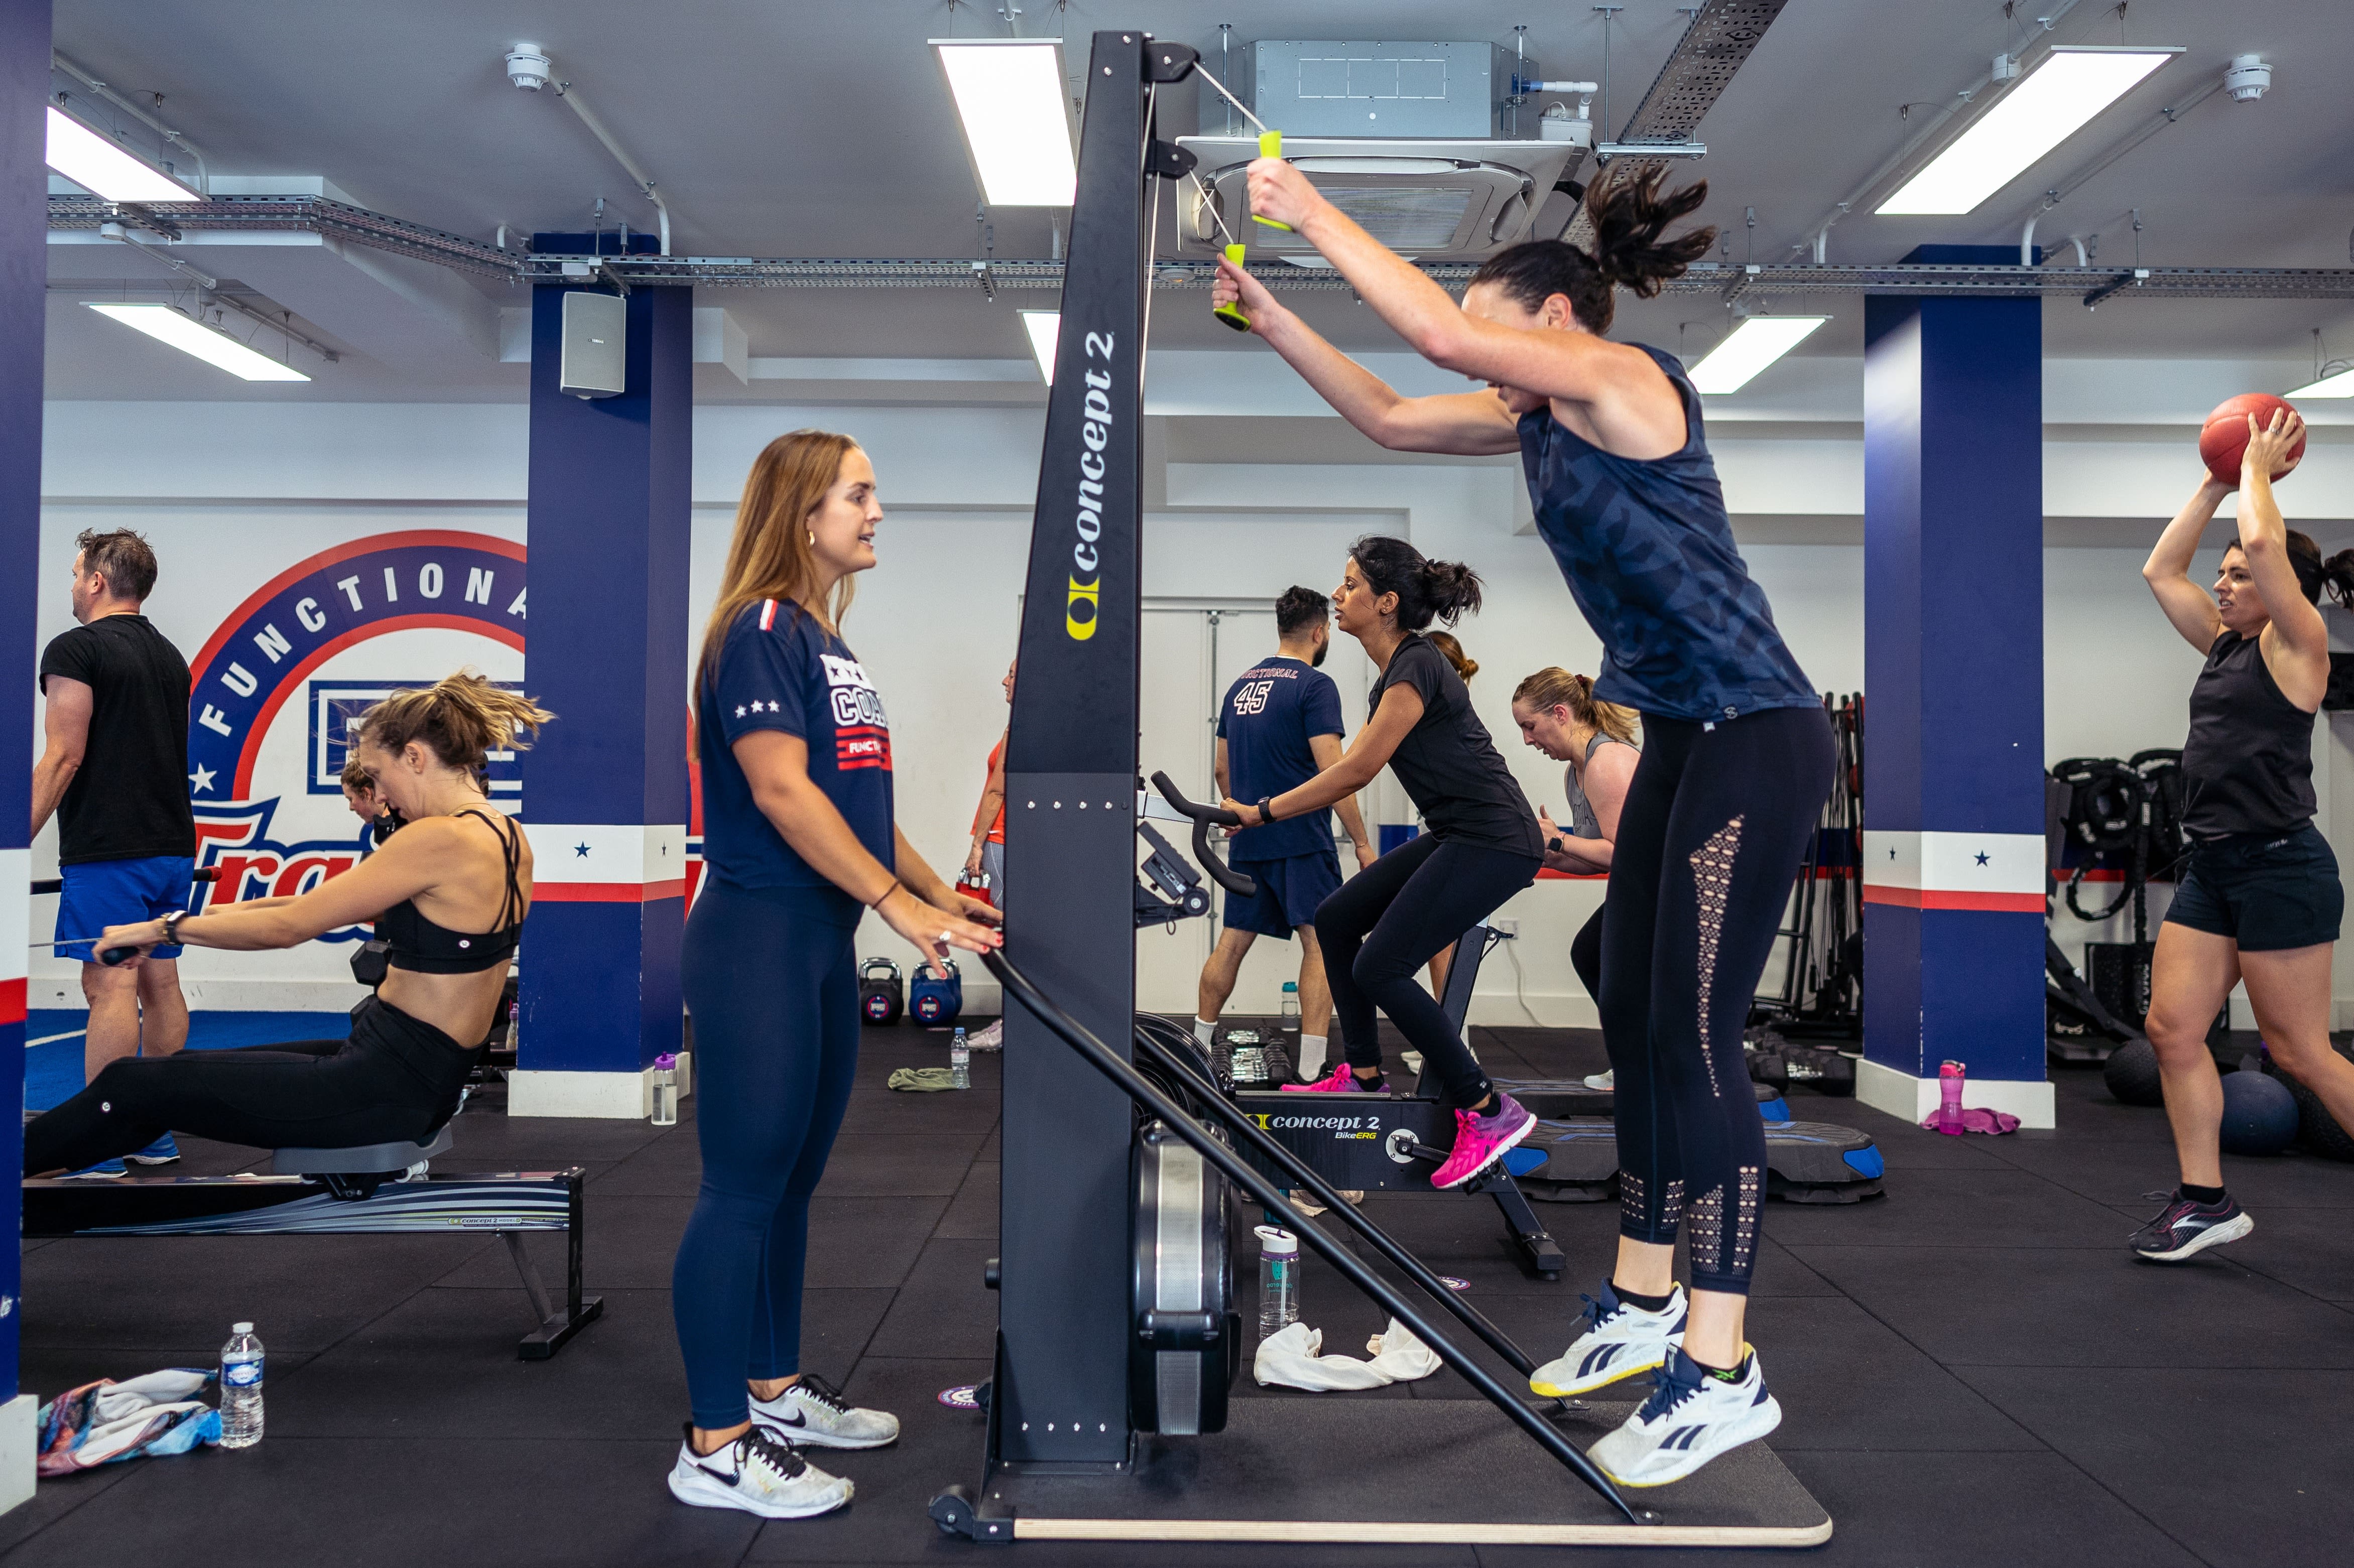 F45 Training - South Edison: Read Reviews and Book Classes on ClassPass